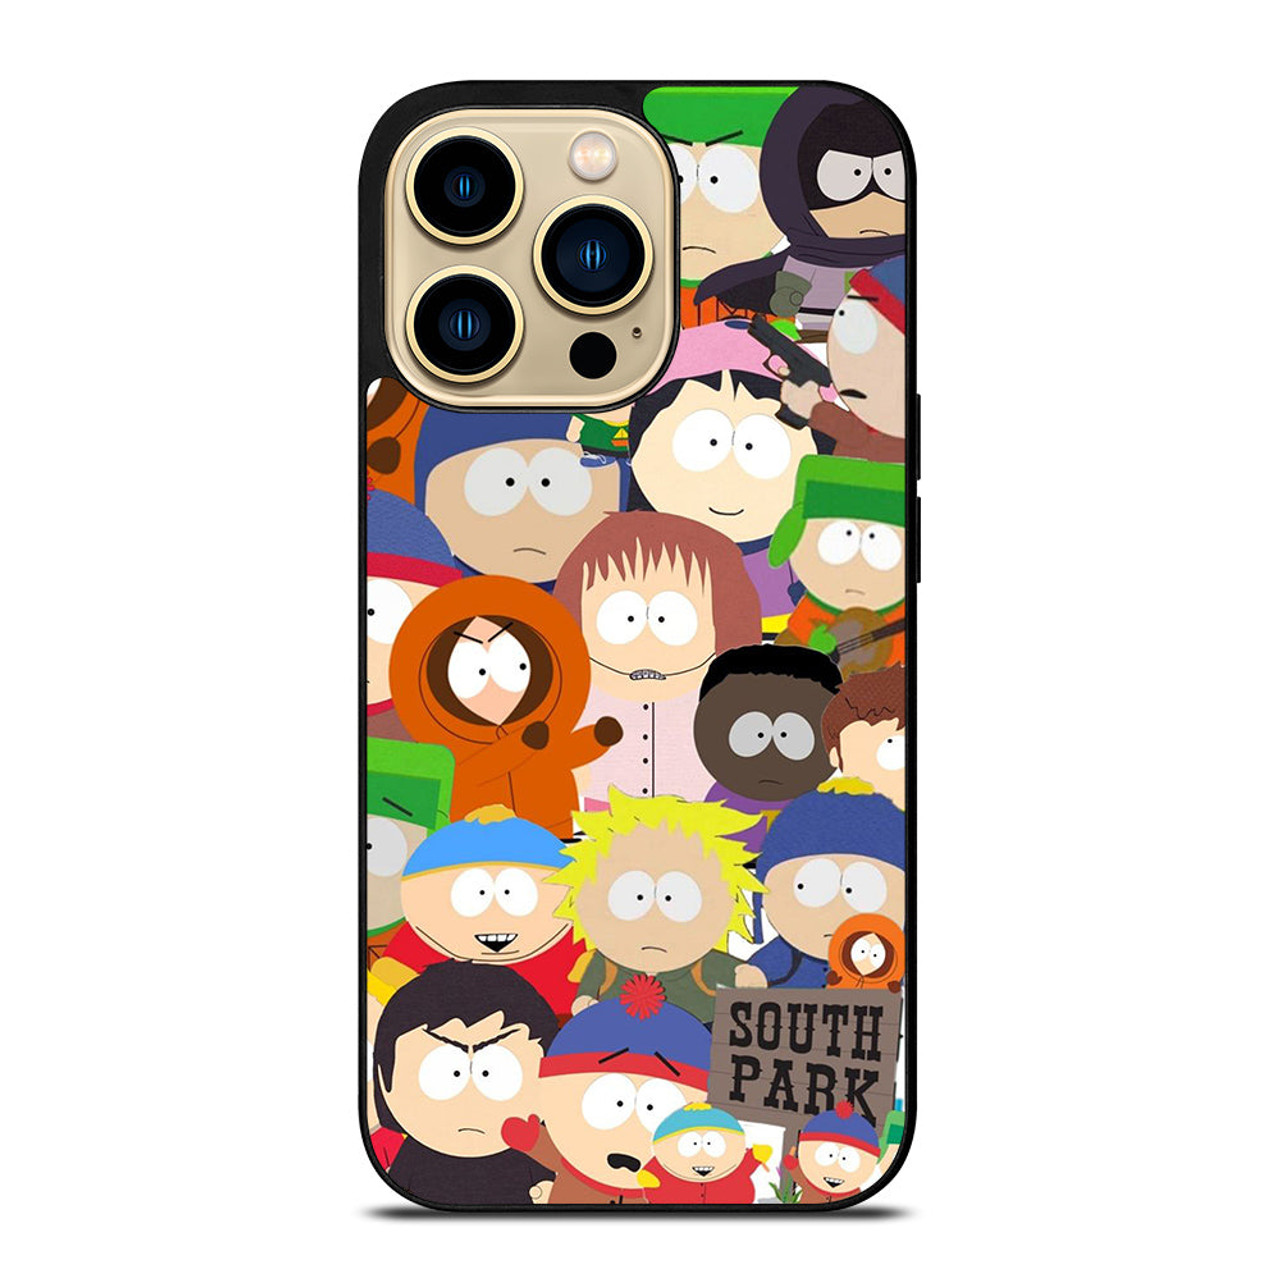 max south park characters